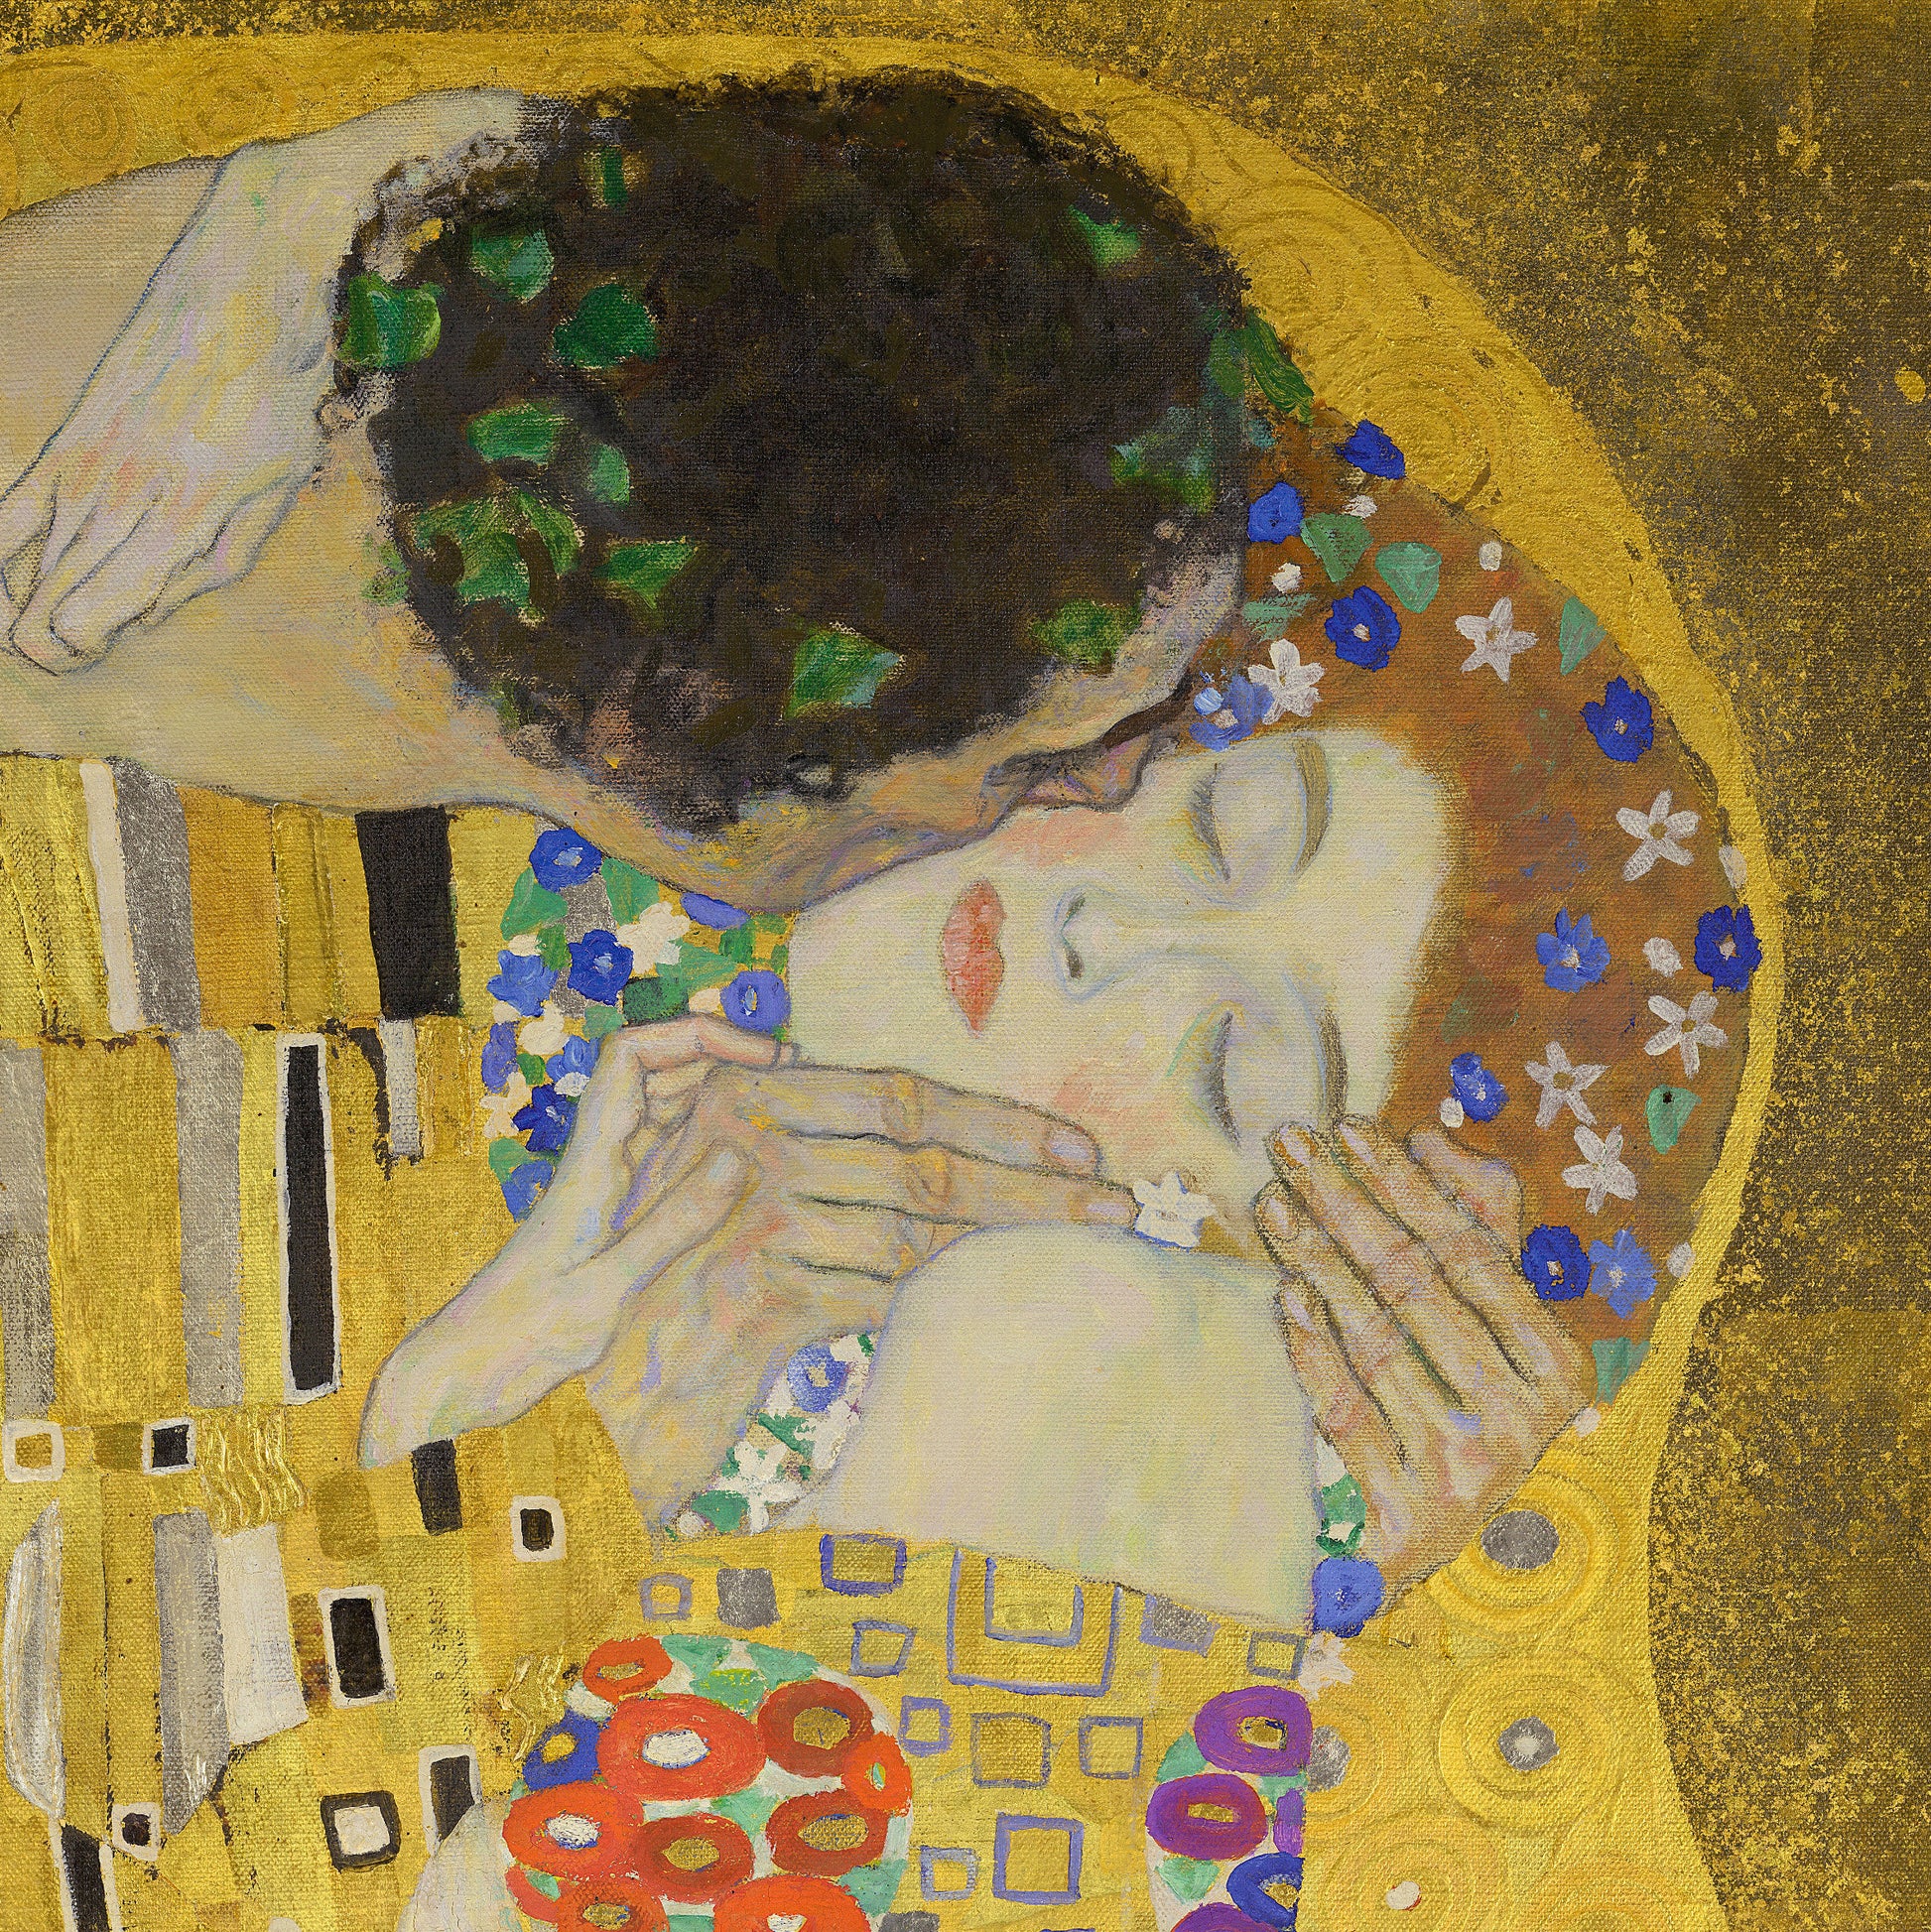 The Kiss by Gustav Klimt, 3d Printed with texture and brush strokes looks like original oil-painting, code:031